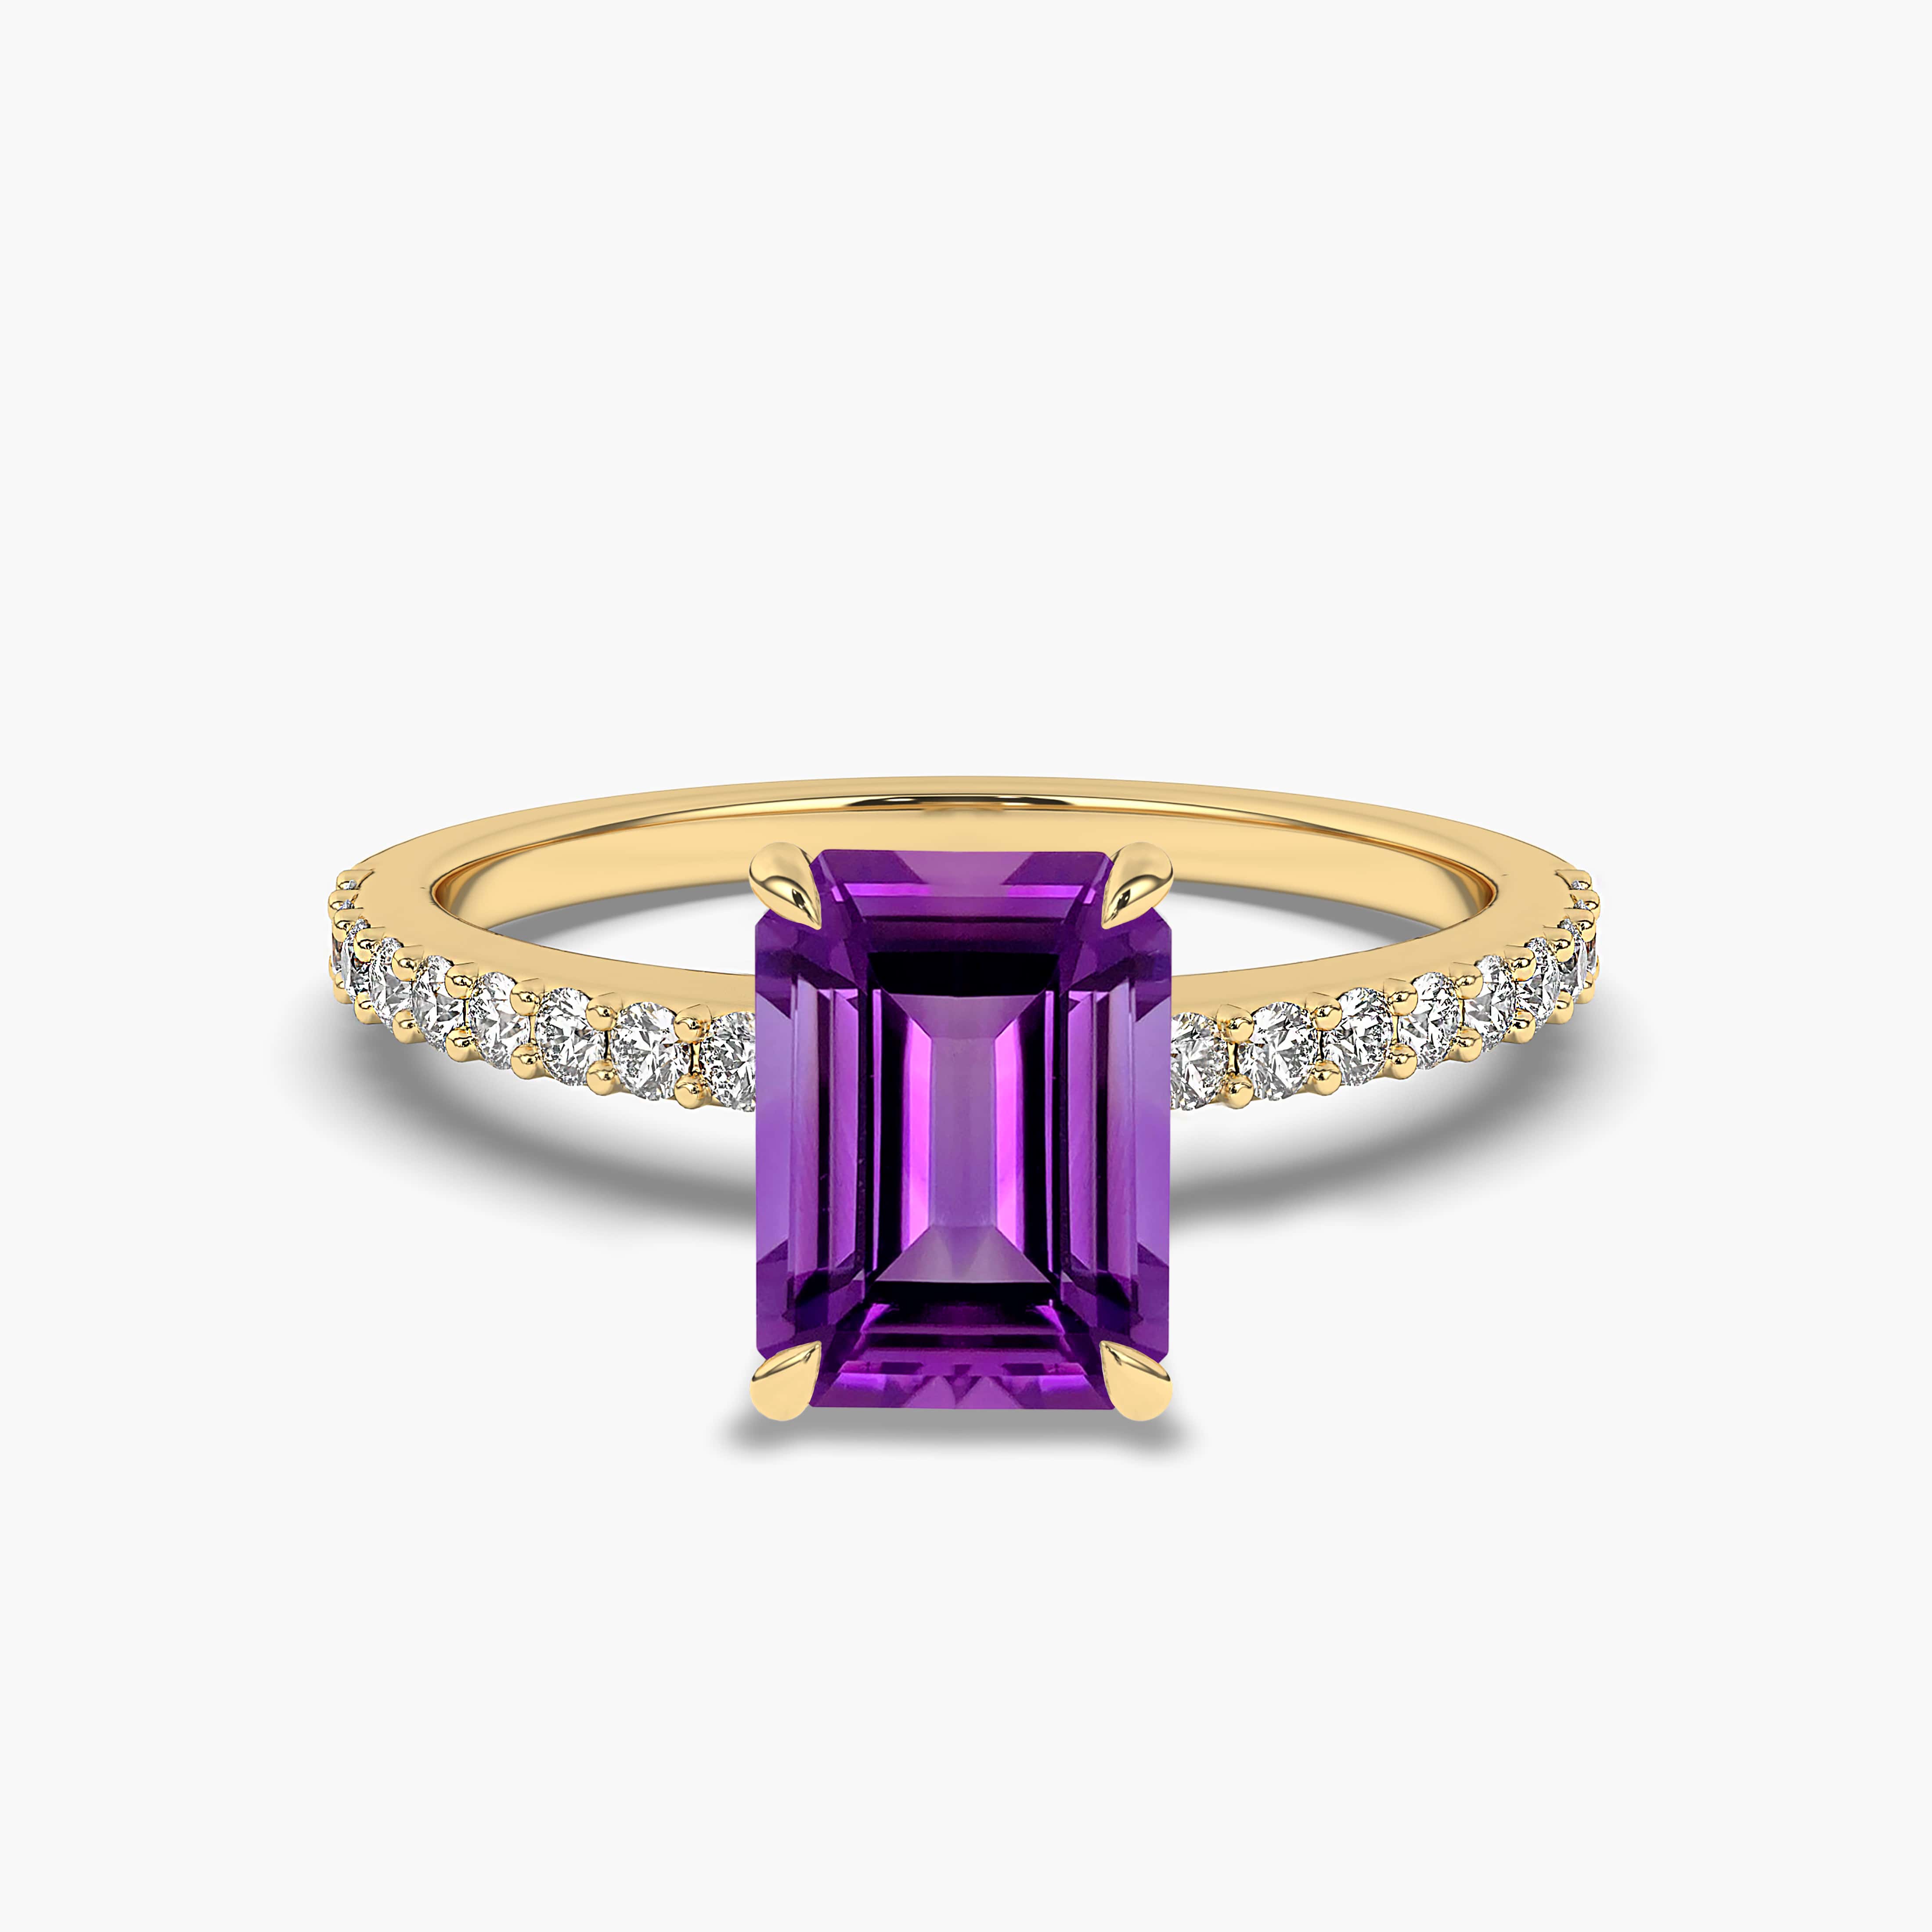 Emerald Cut Amethyst Ring with Diamond Side Stones in Yellow Gold